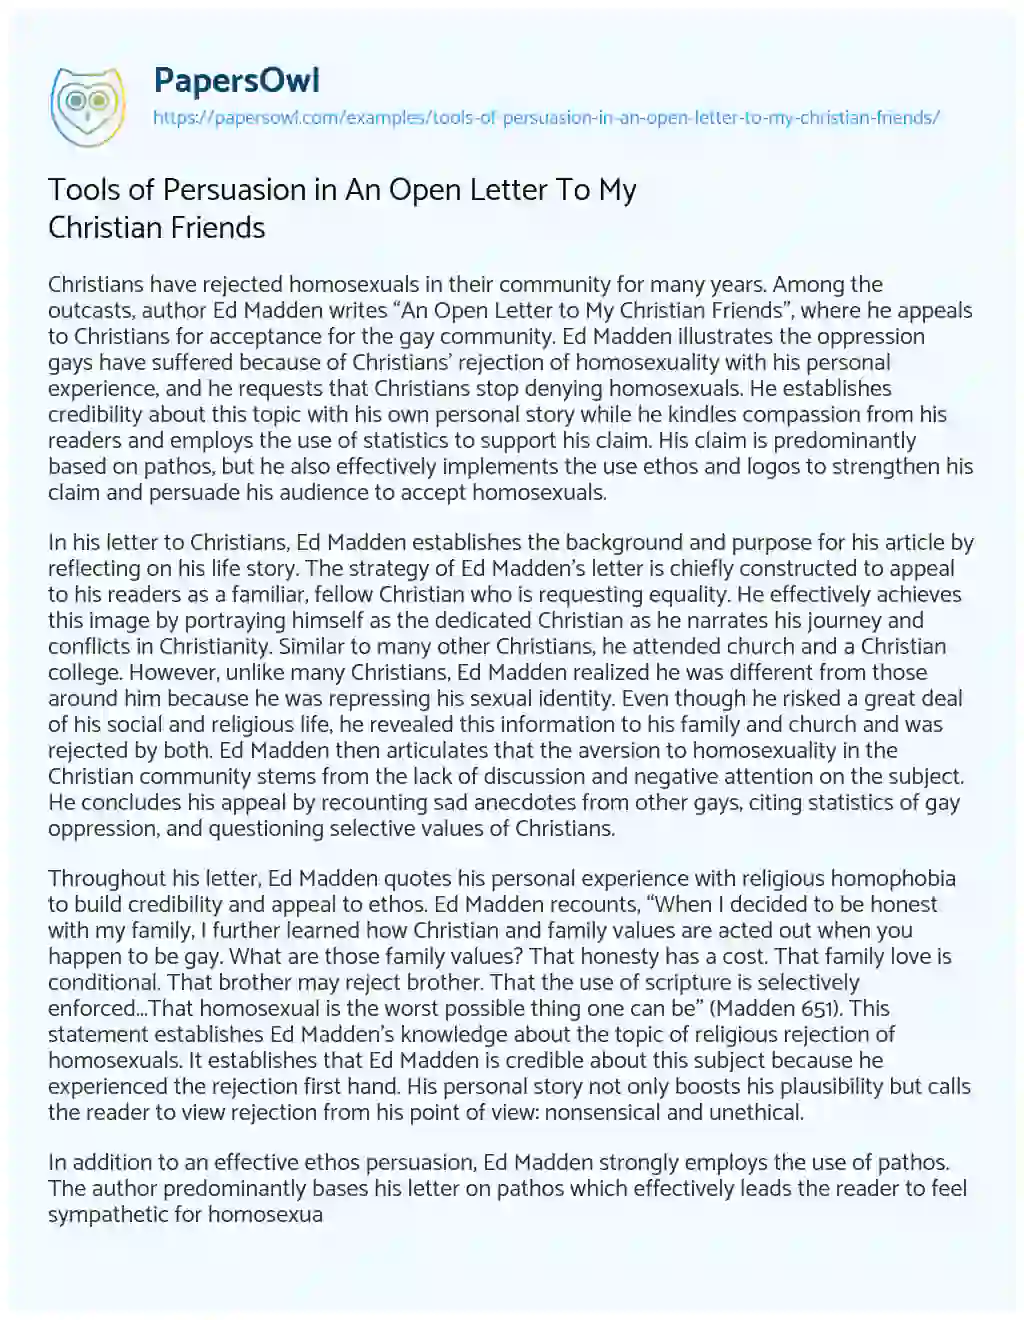 Essay on Tools of Persuasion in an Open Letter to my Christian Friends